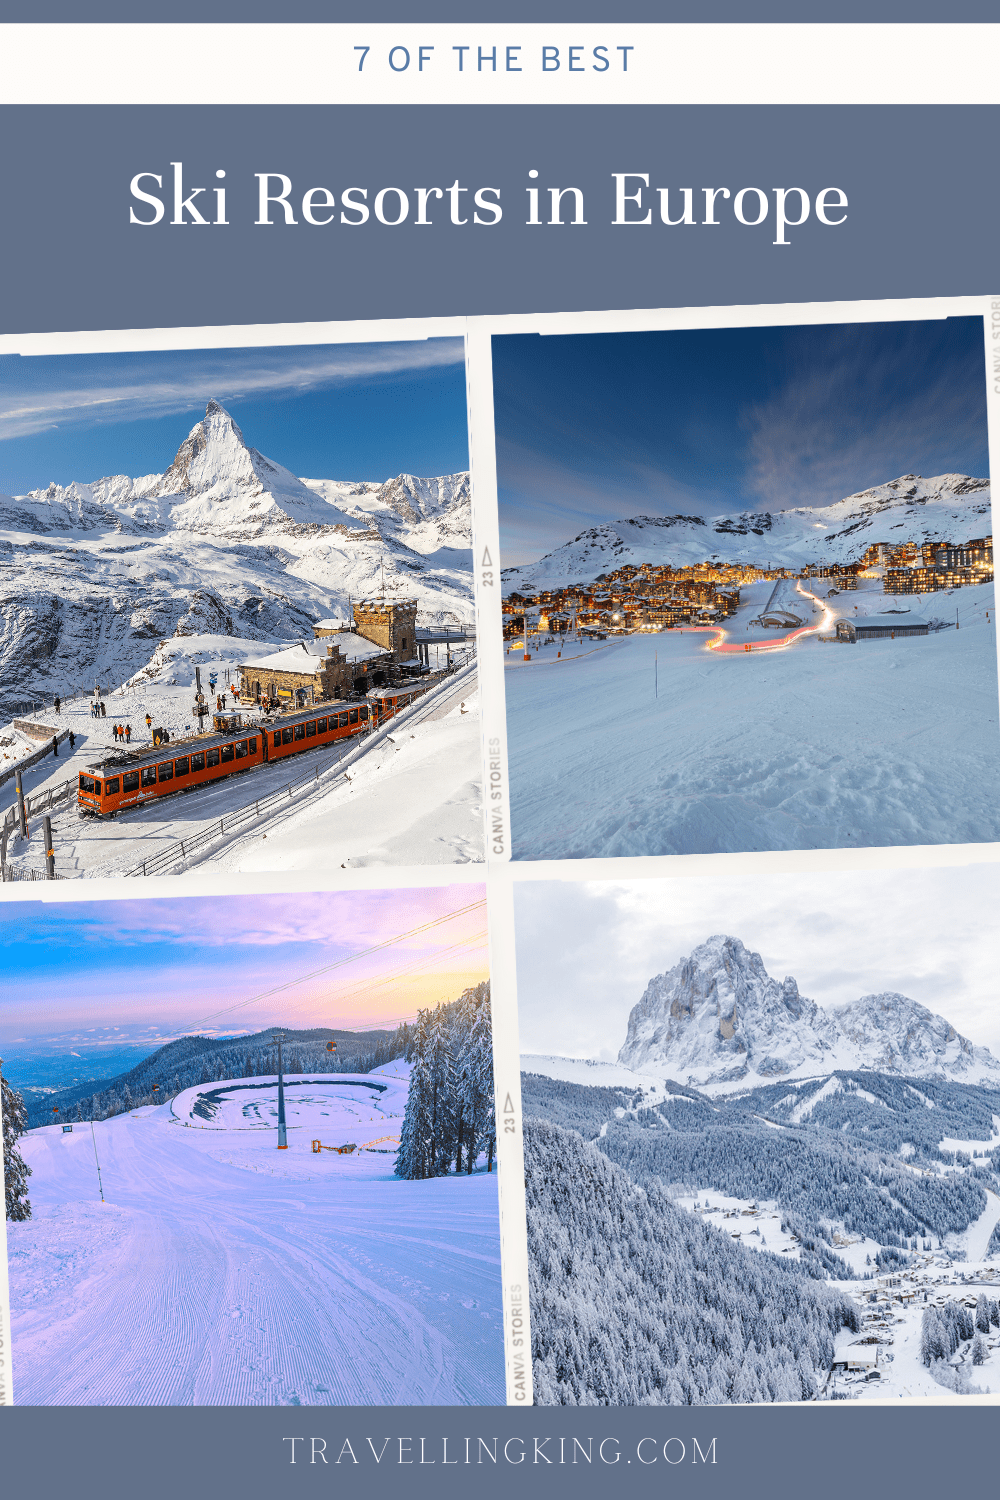 7 of the Best Ski Resorts in Europe